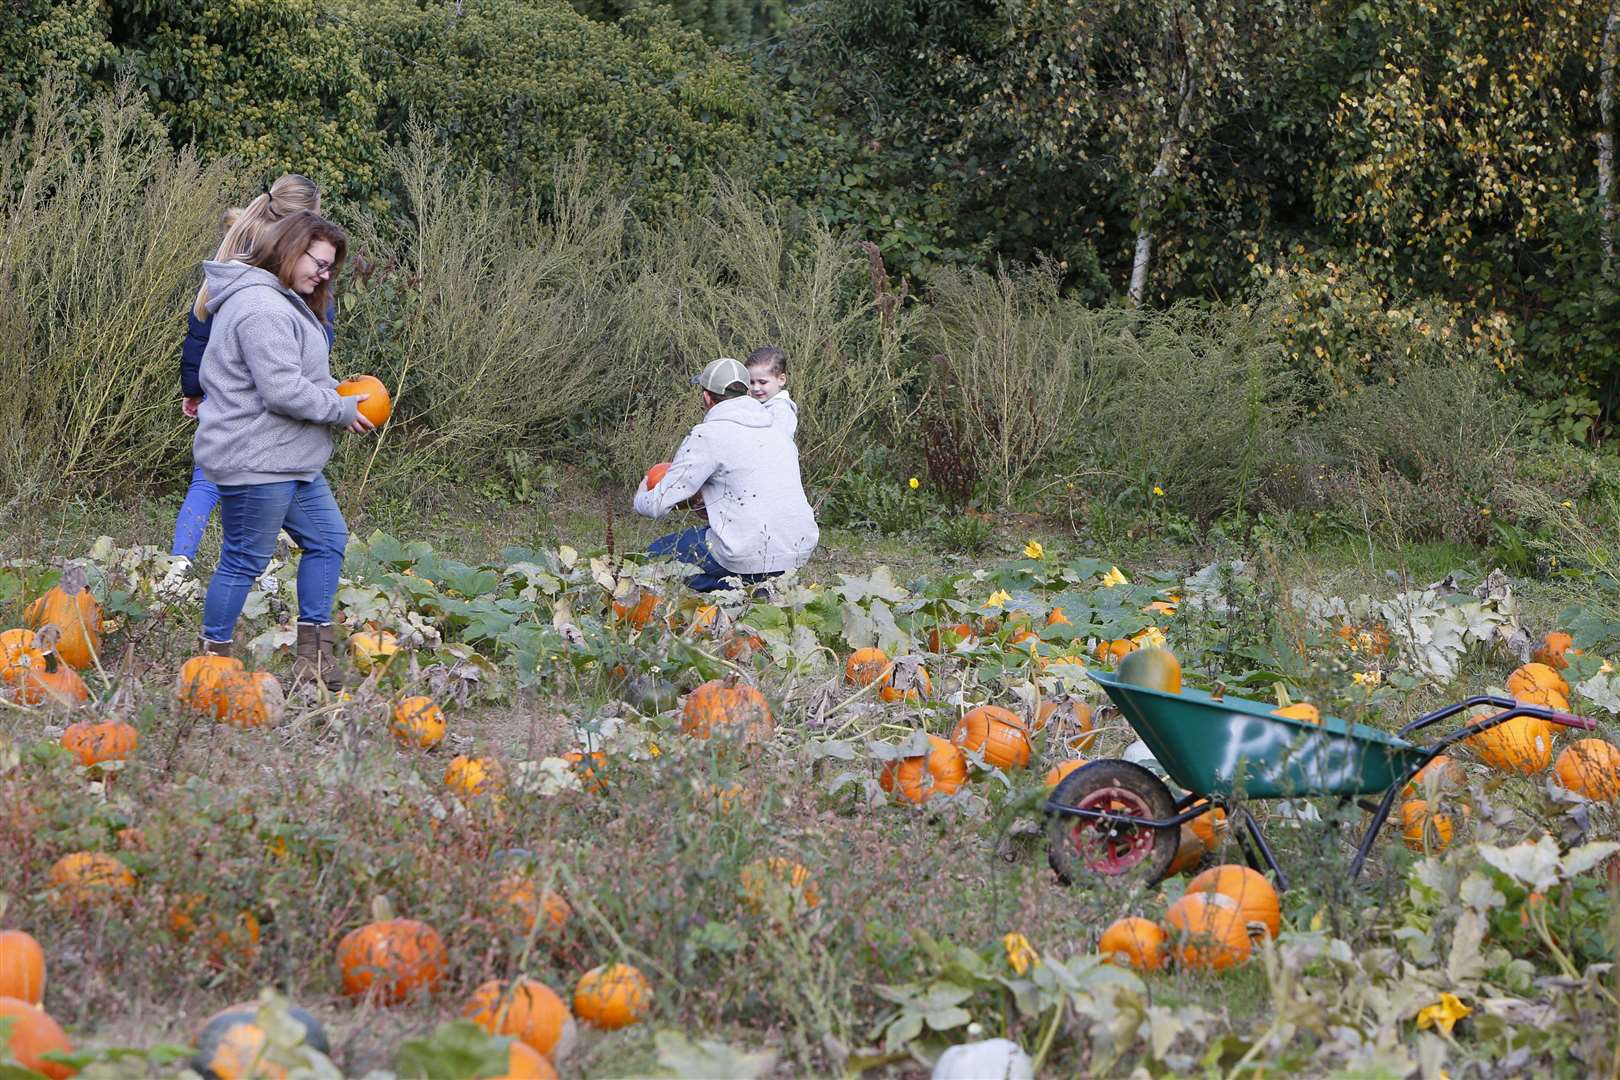 Milebush Farm is known for its year-round fruit picking. Picture: Andy Jones